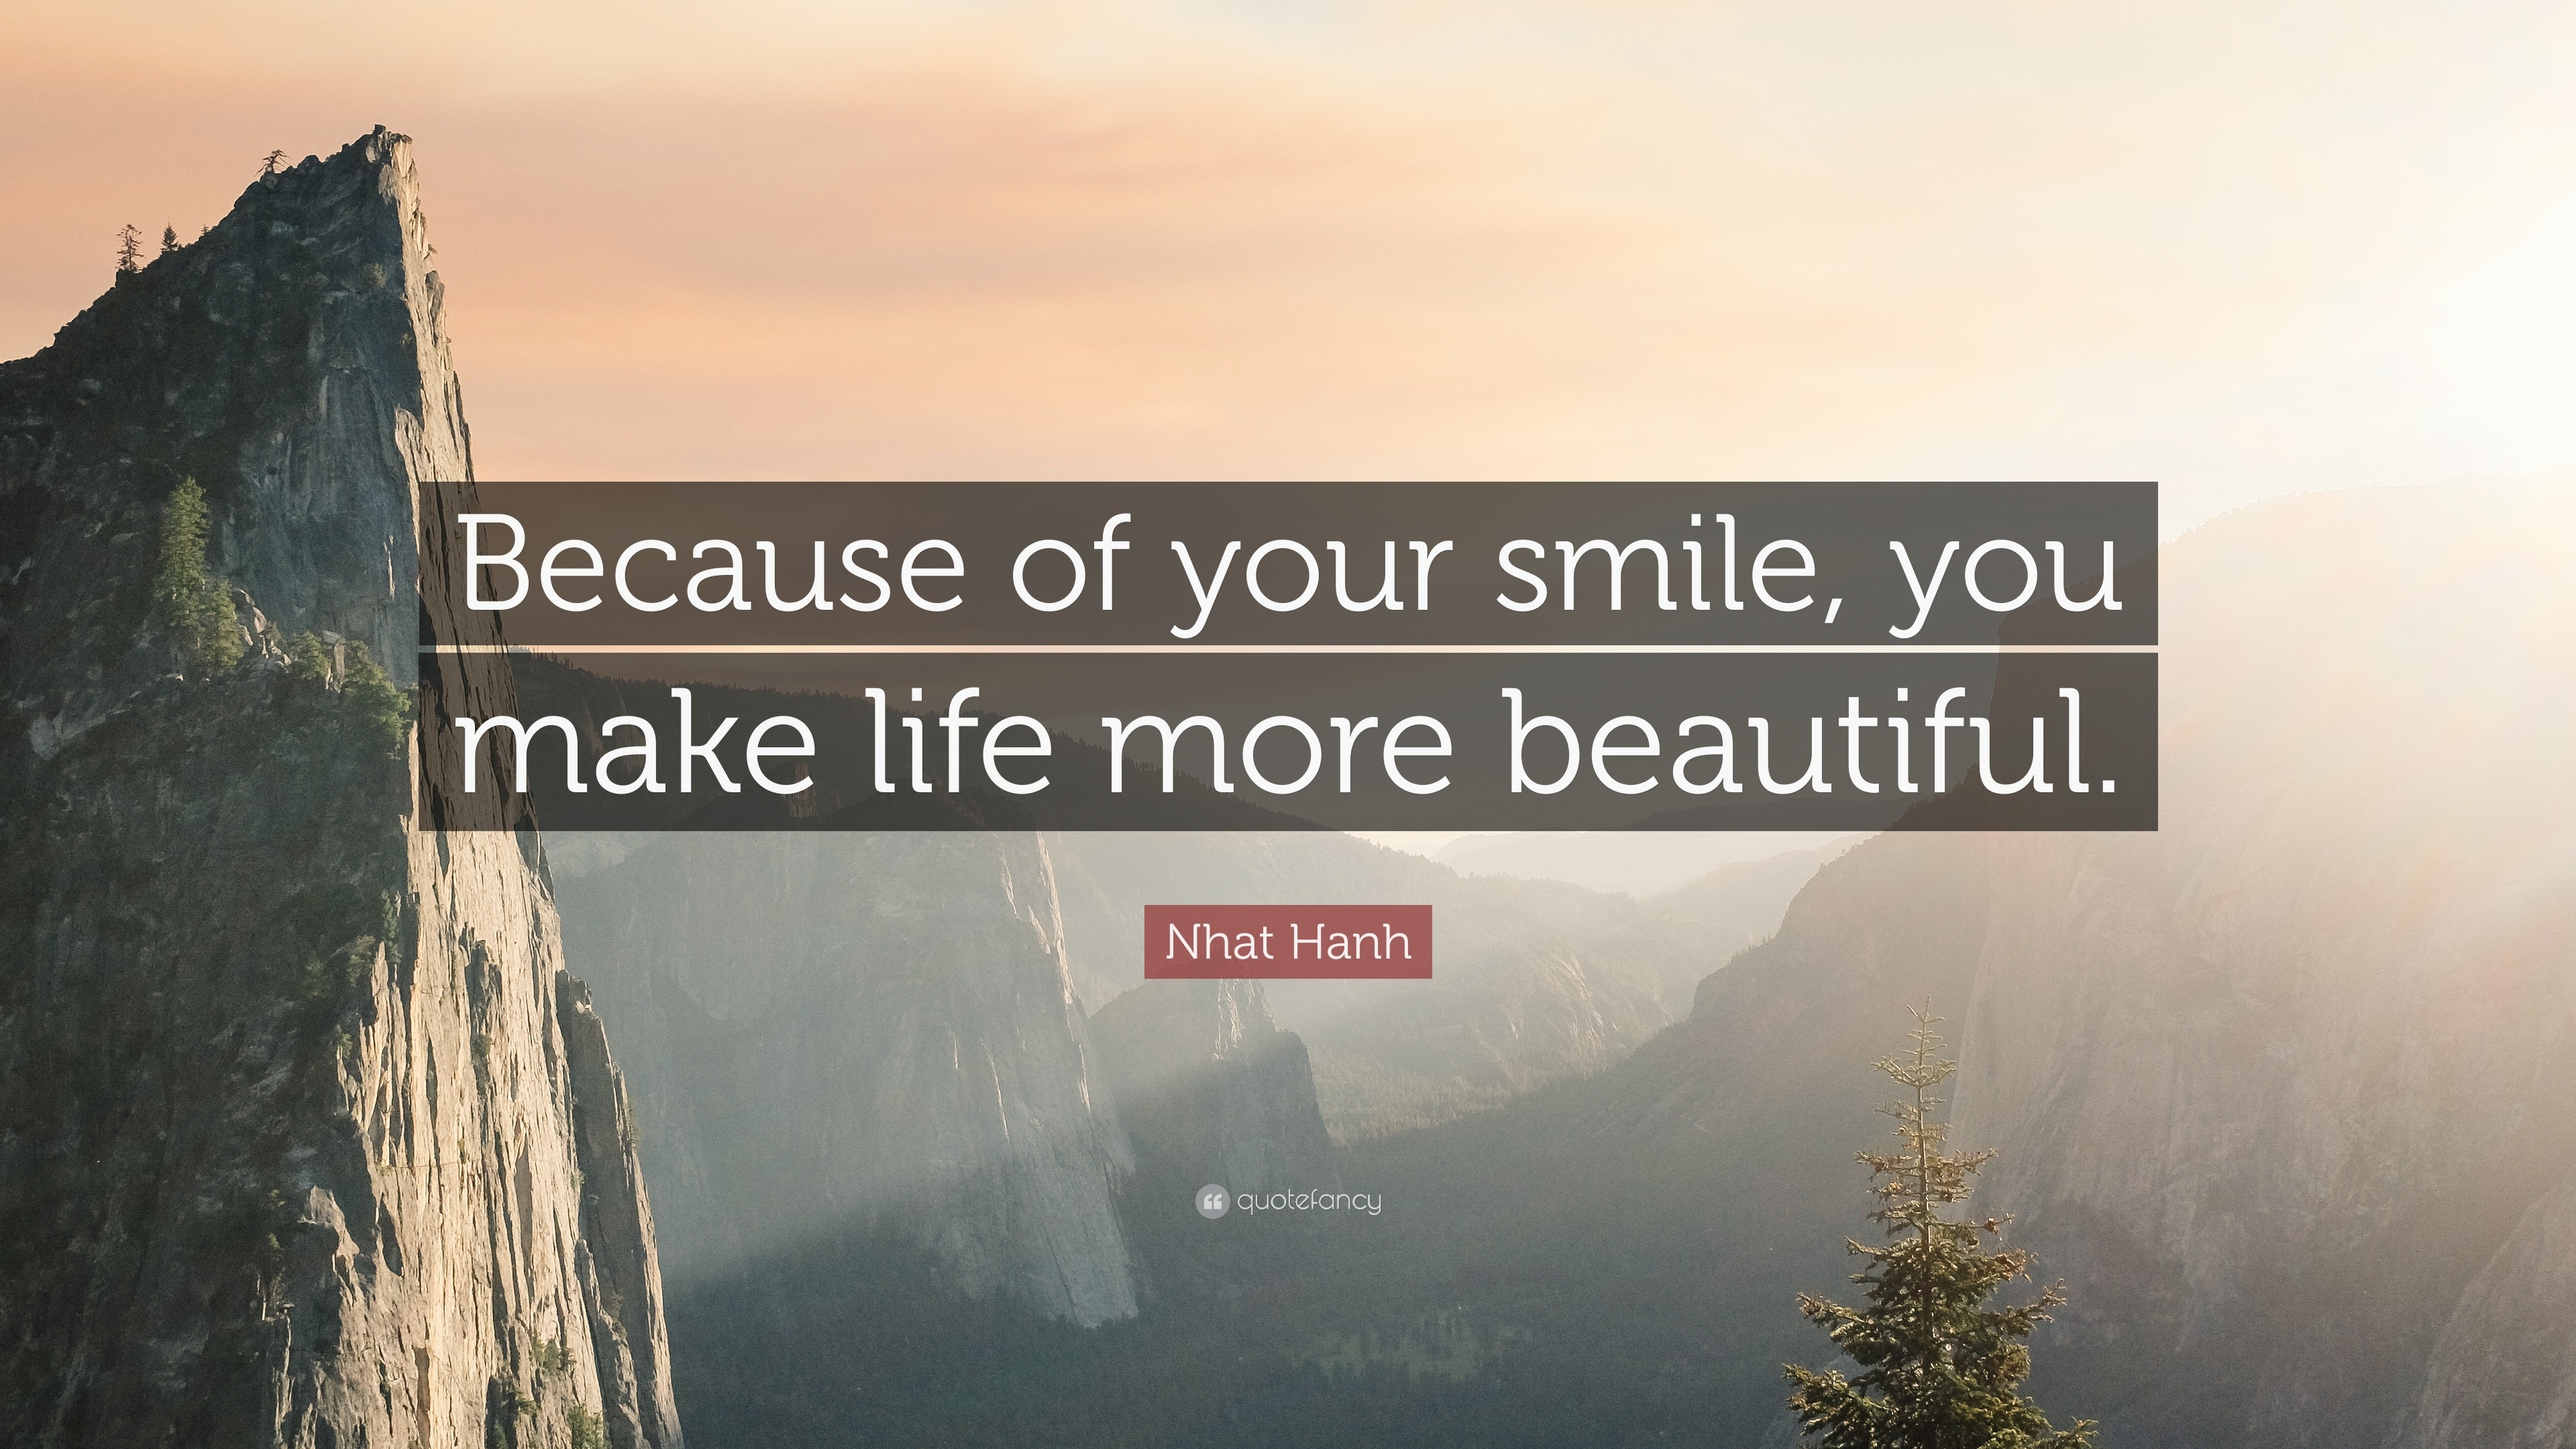 Smile Quotes “Because of your smile you make life more beautiful ”